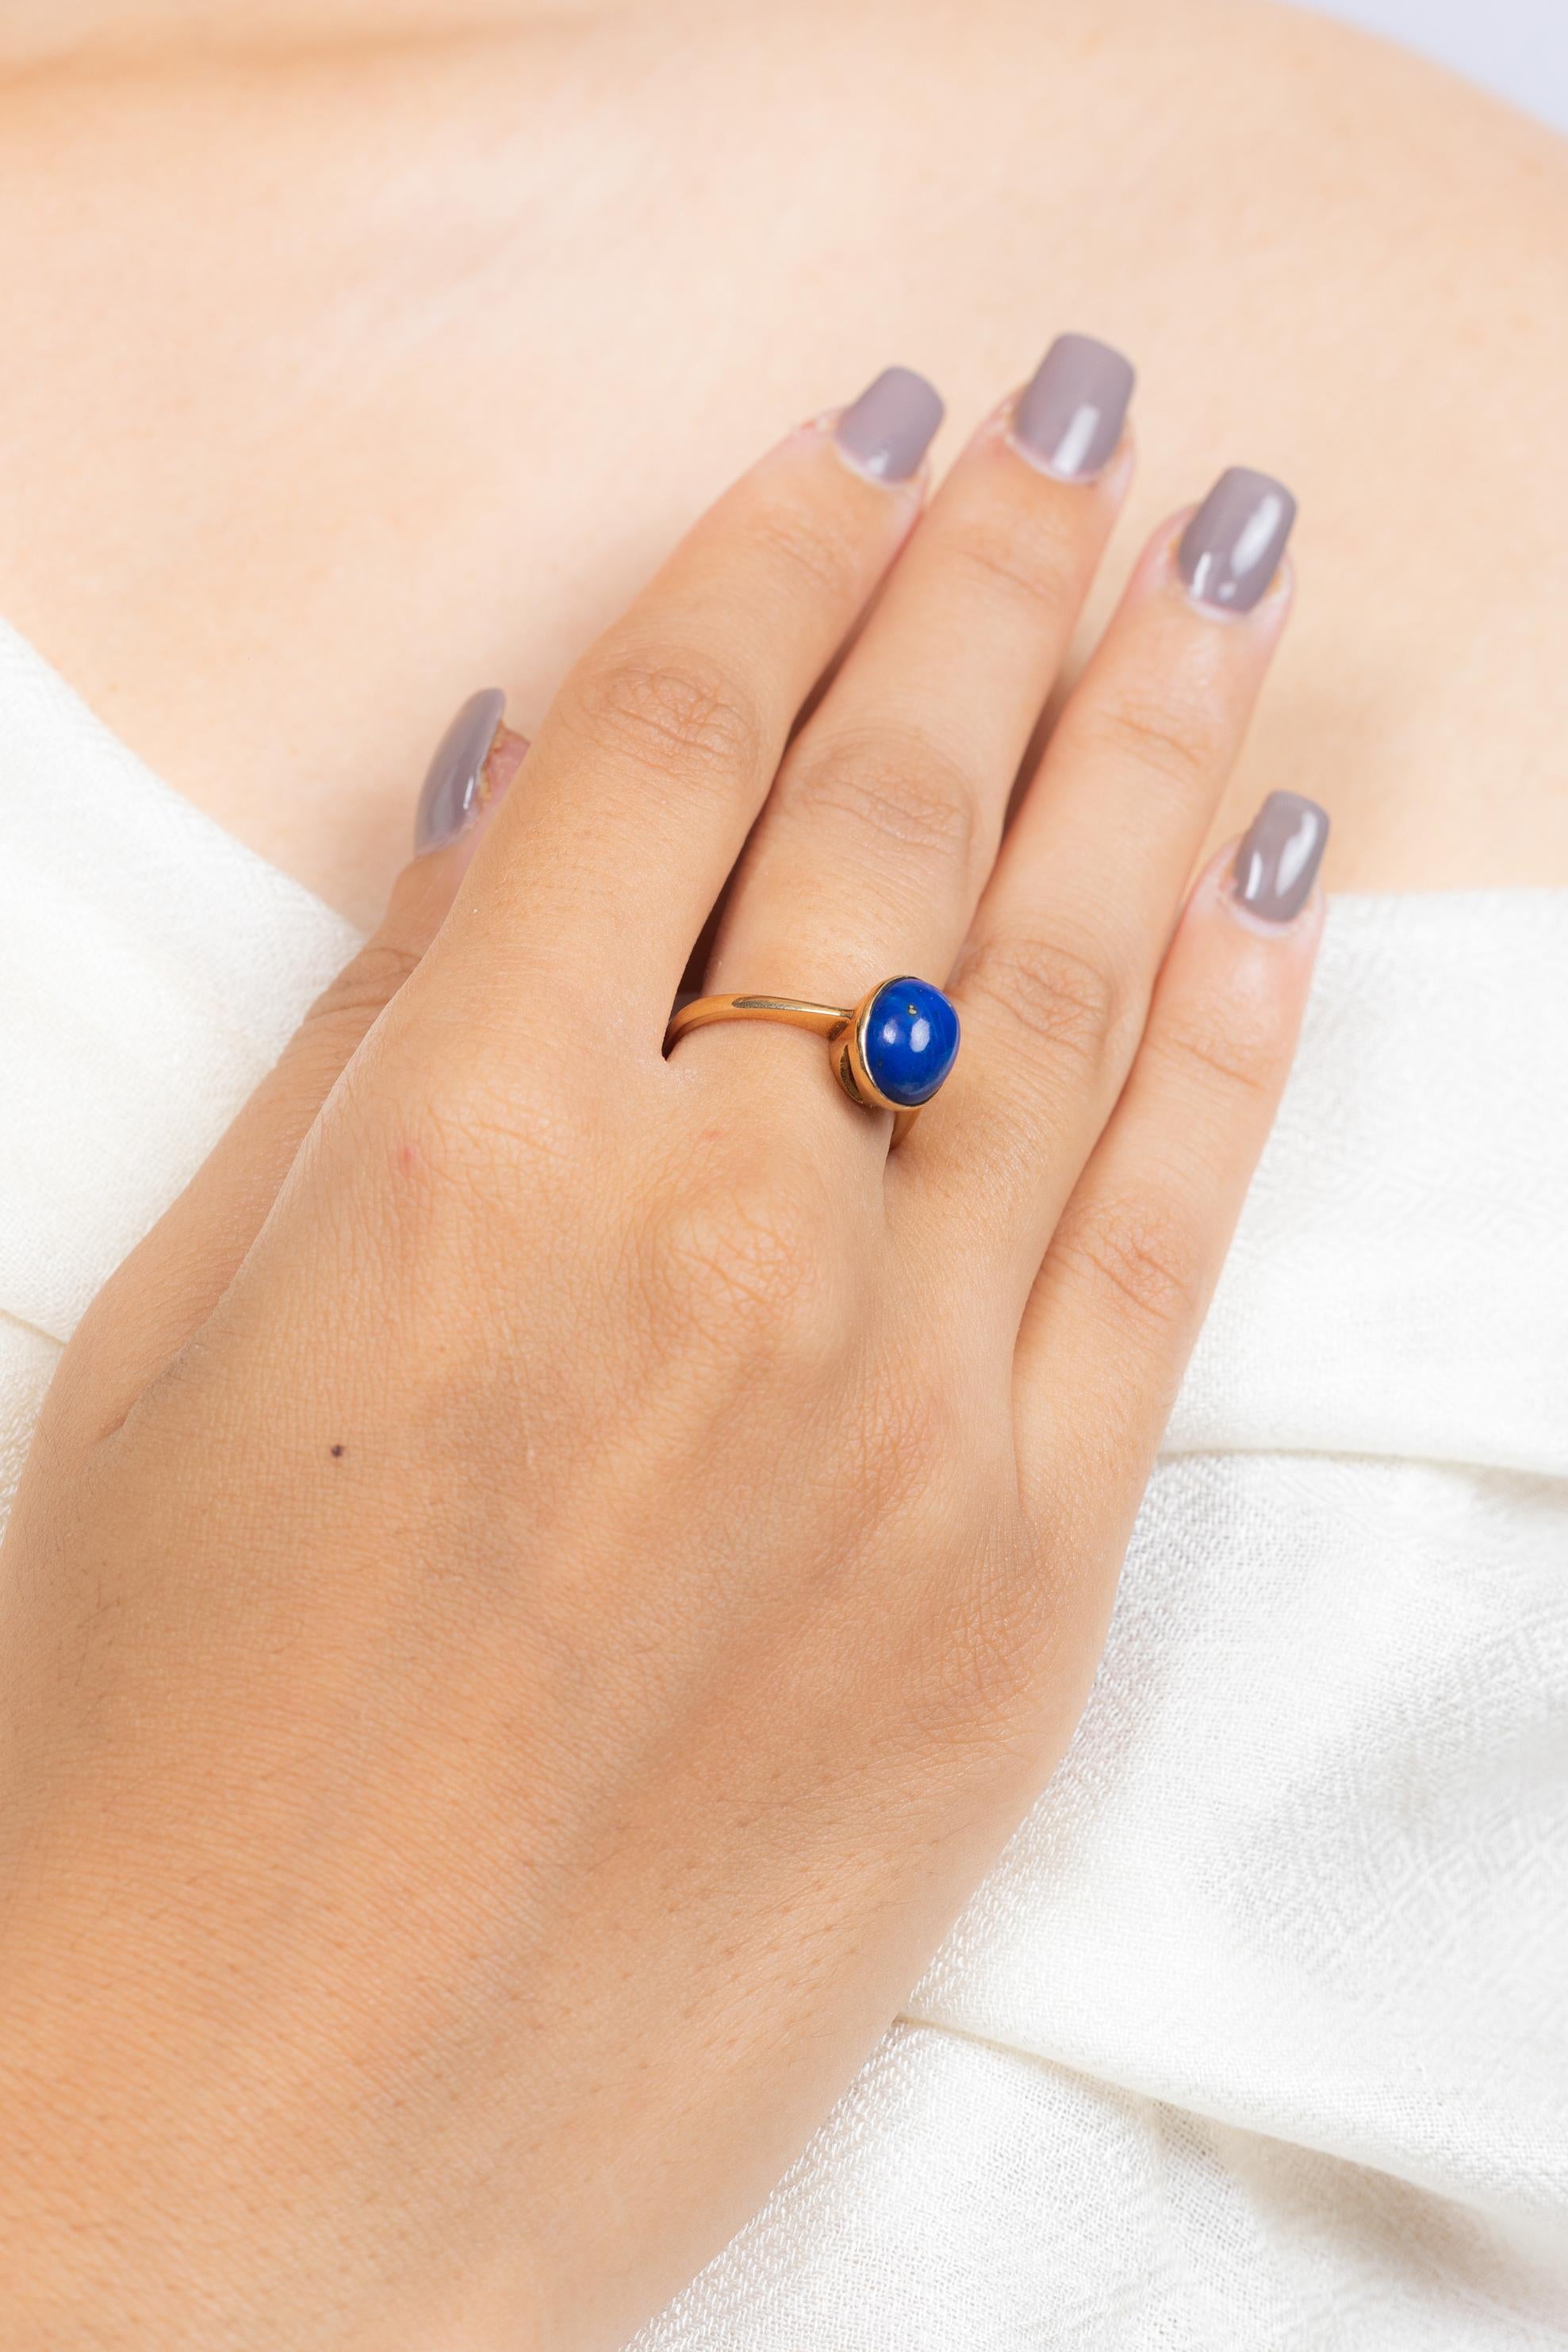 For Sale:  2.87 Carat Lapis Lazuli Solitaire Ring in 18K Yellow Gold  8